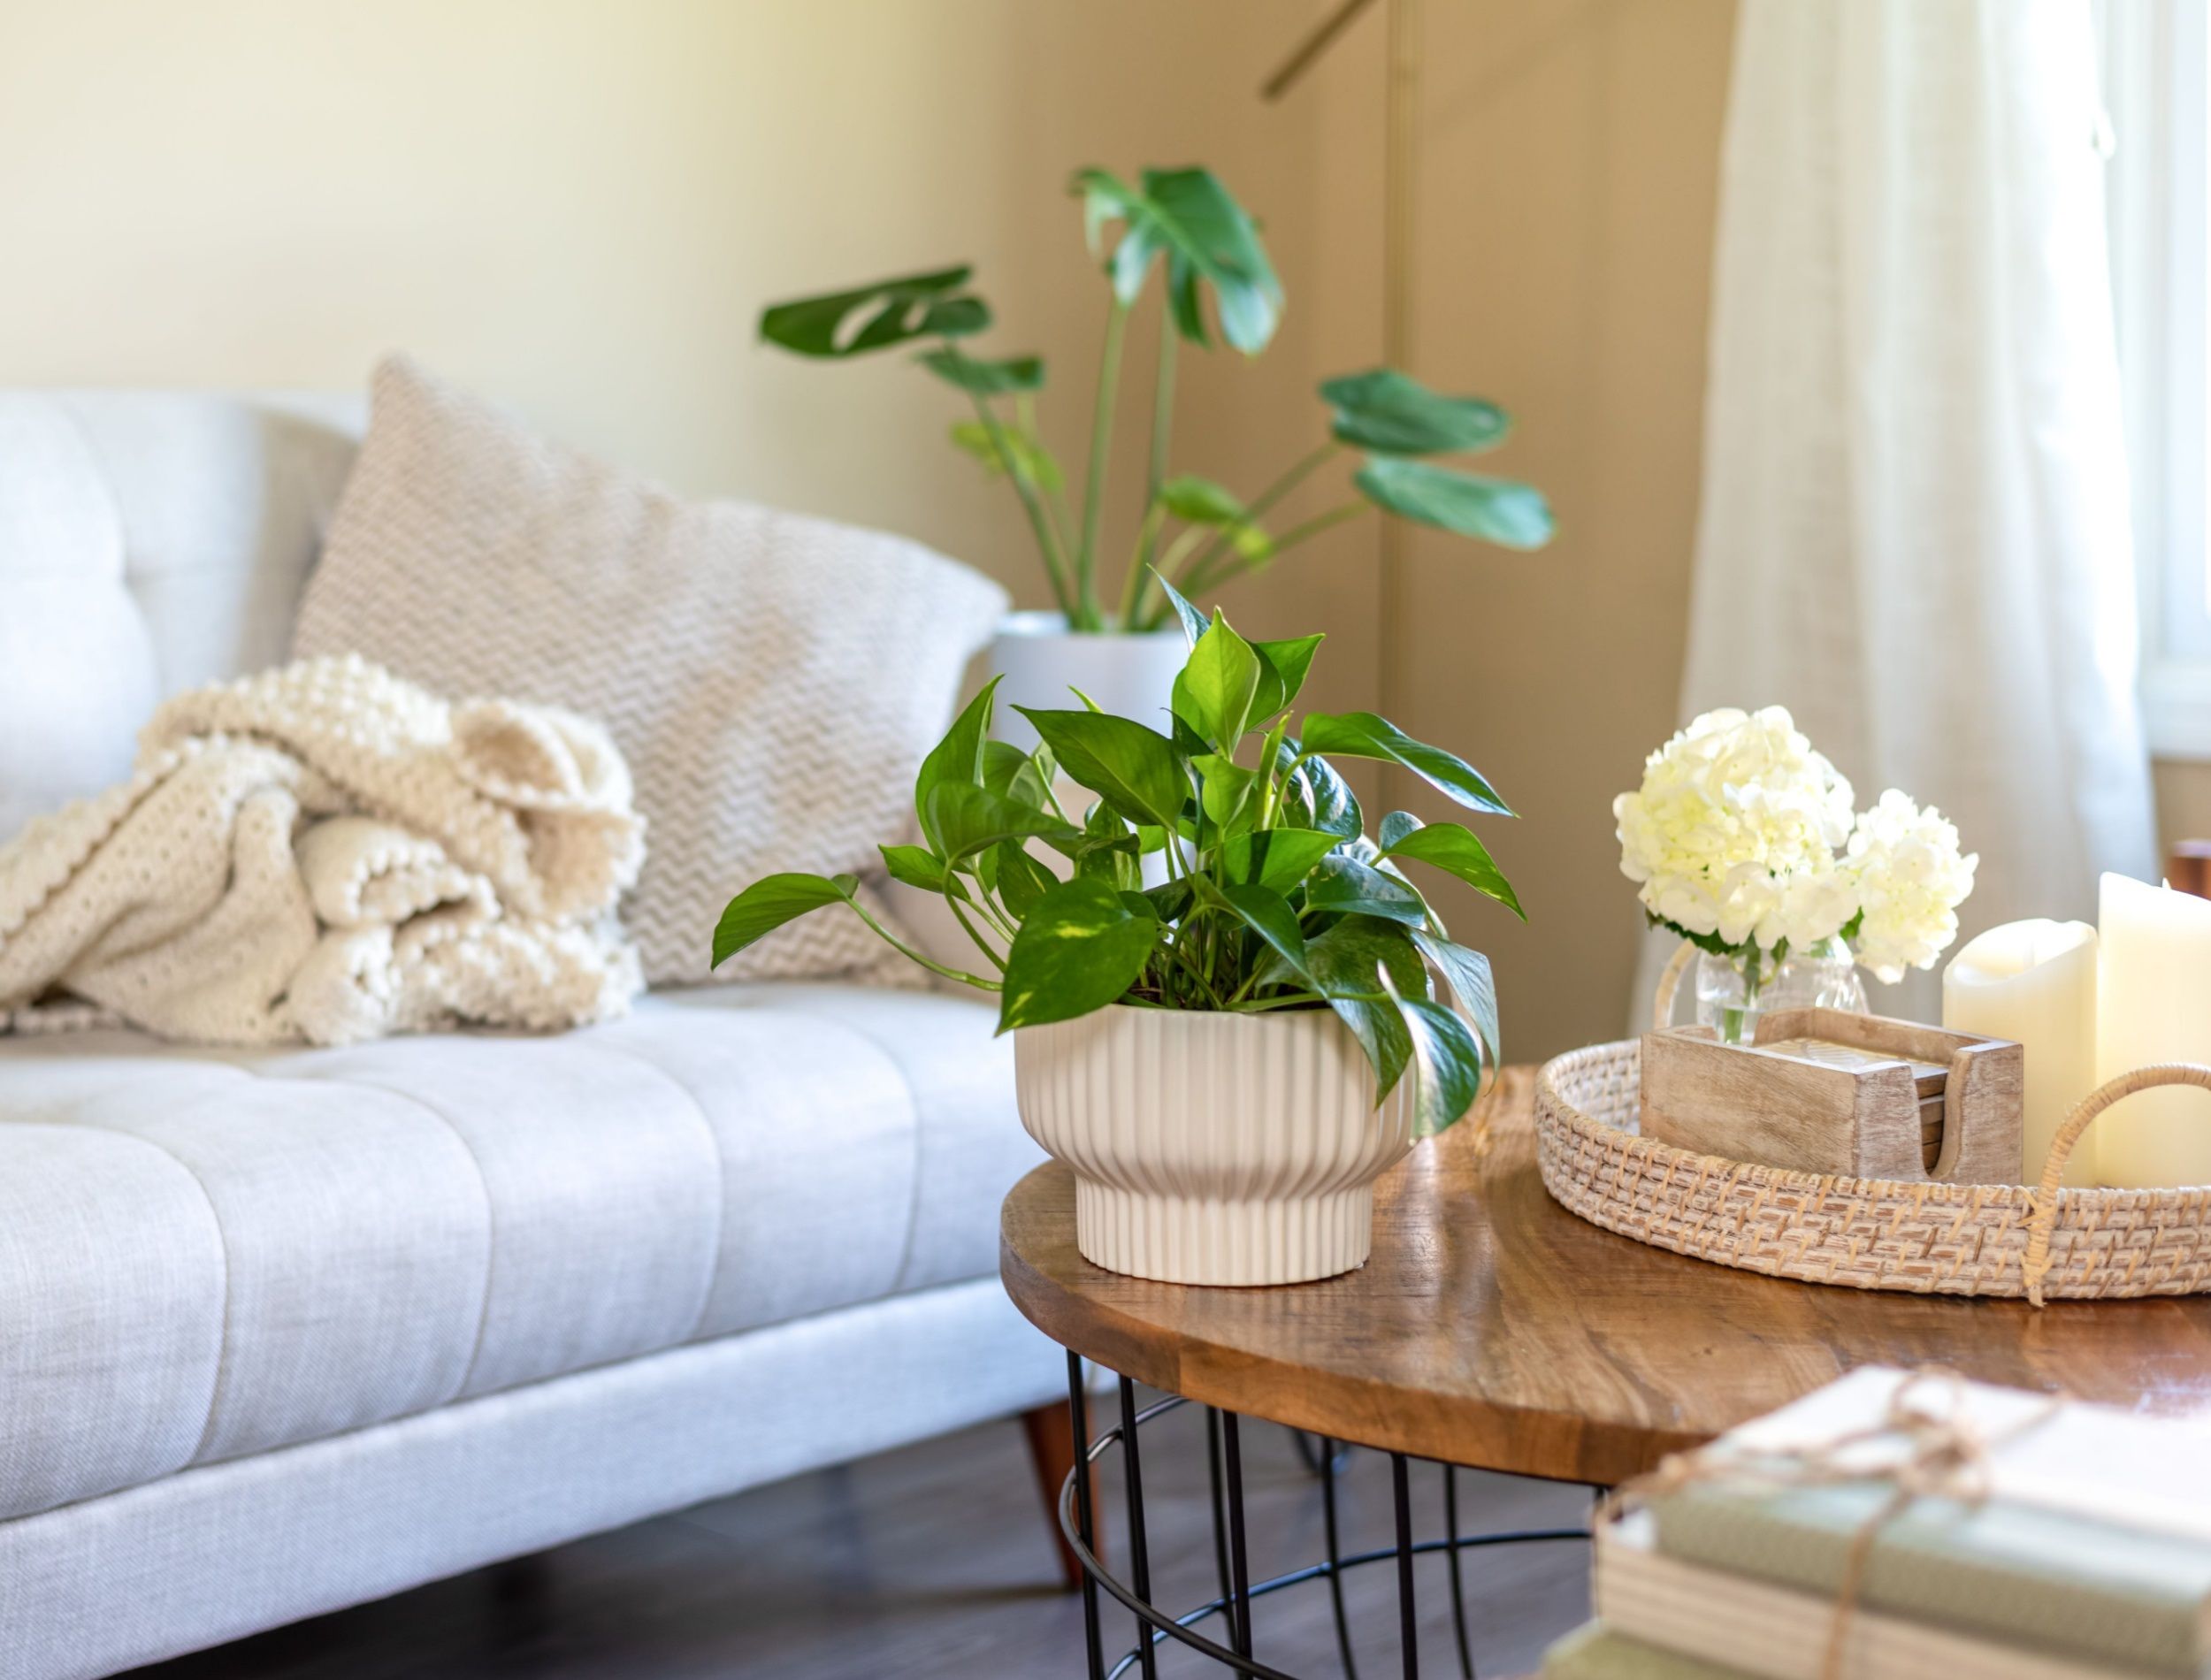 Potted plant on the table in a light and bright stylish living room